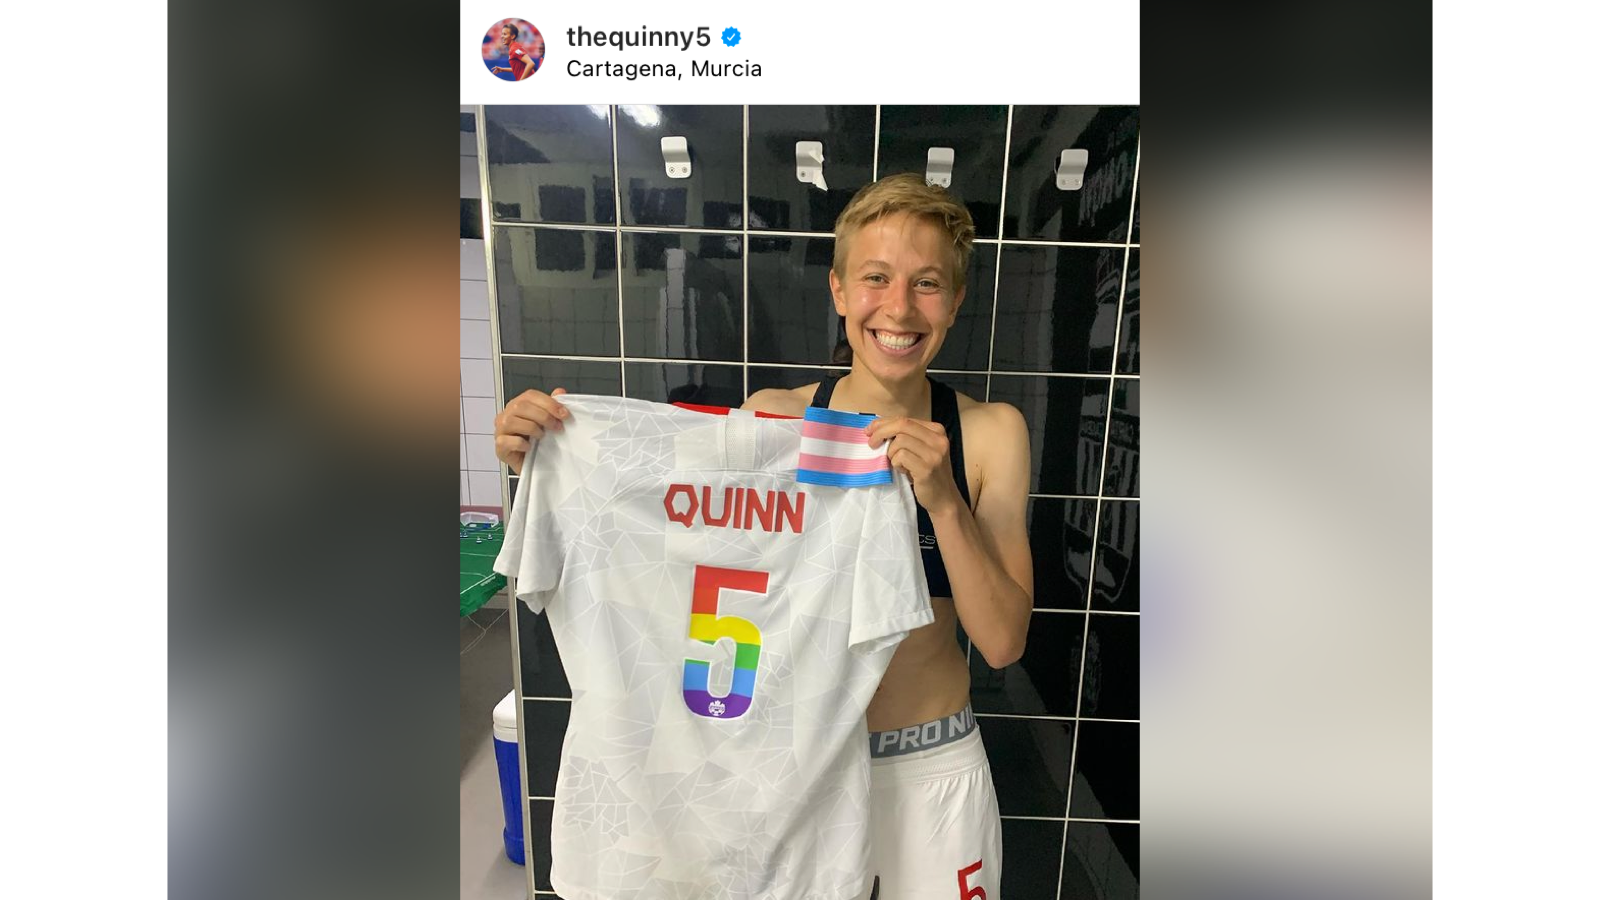 Soccer player Quinn holding up their Pride-colored jersey as well as a small trans flag.